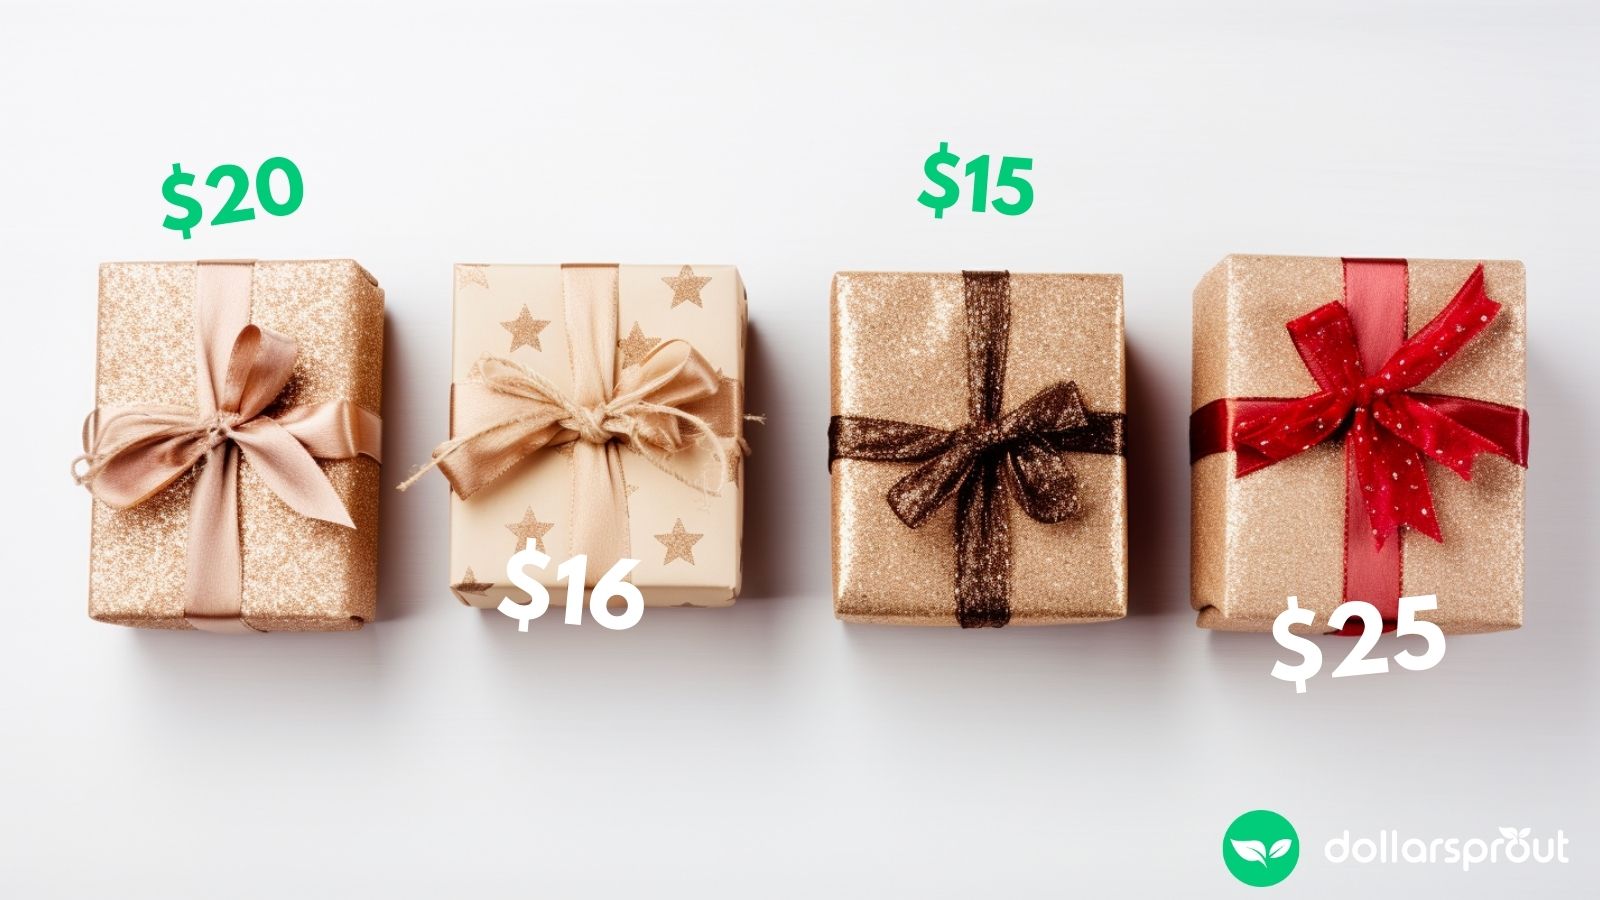 50 homemade gift ideas to make for under $5 - The Inspiration Board